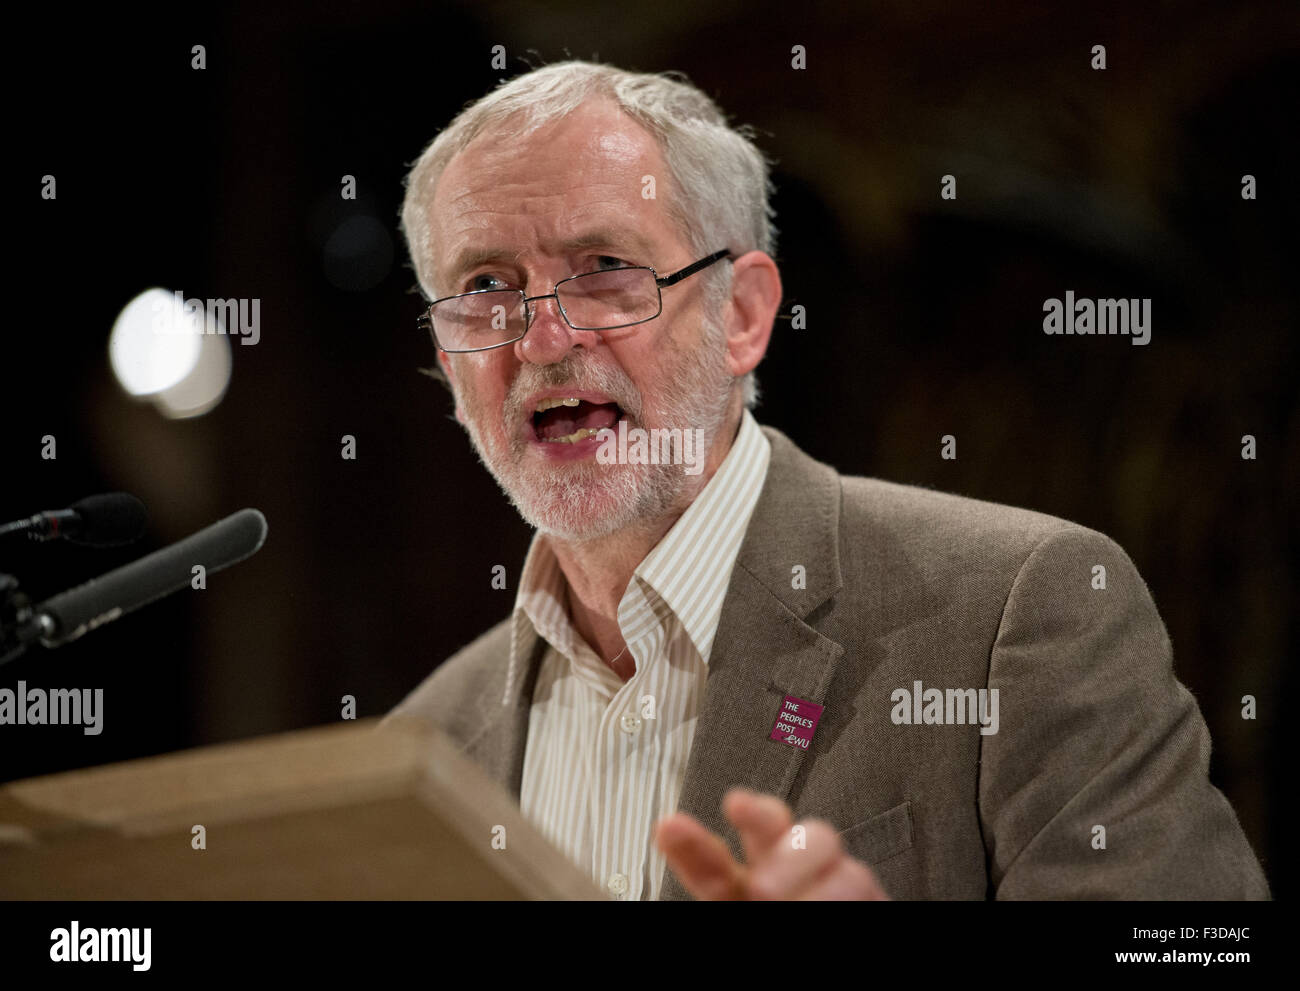 Manchester, UK. 5th October 2015. Labour Party leader Jeremy Corbyn speaks at the People's Post Rally event at Manchester Cathedral. Credit:  Russell Hart/Alamy Live News. Stock Photo